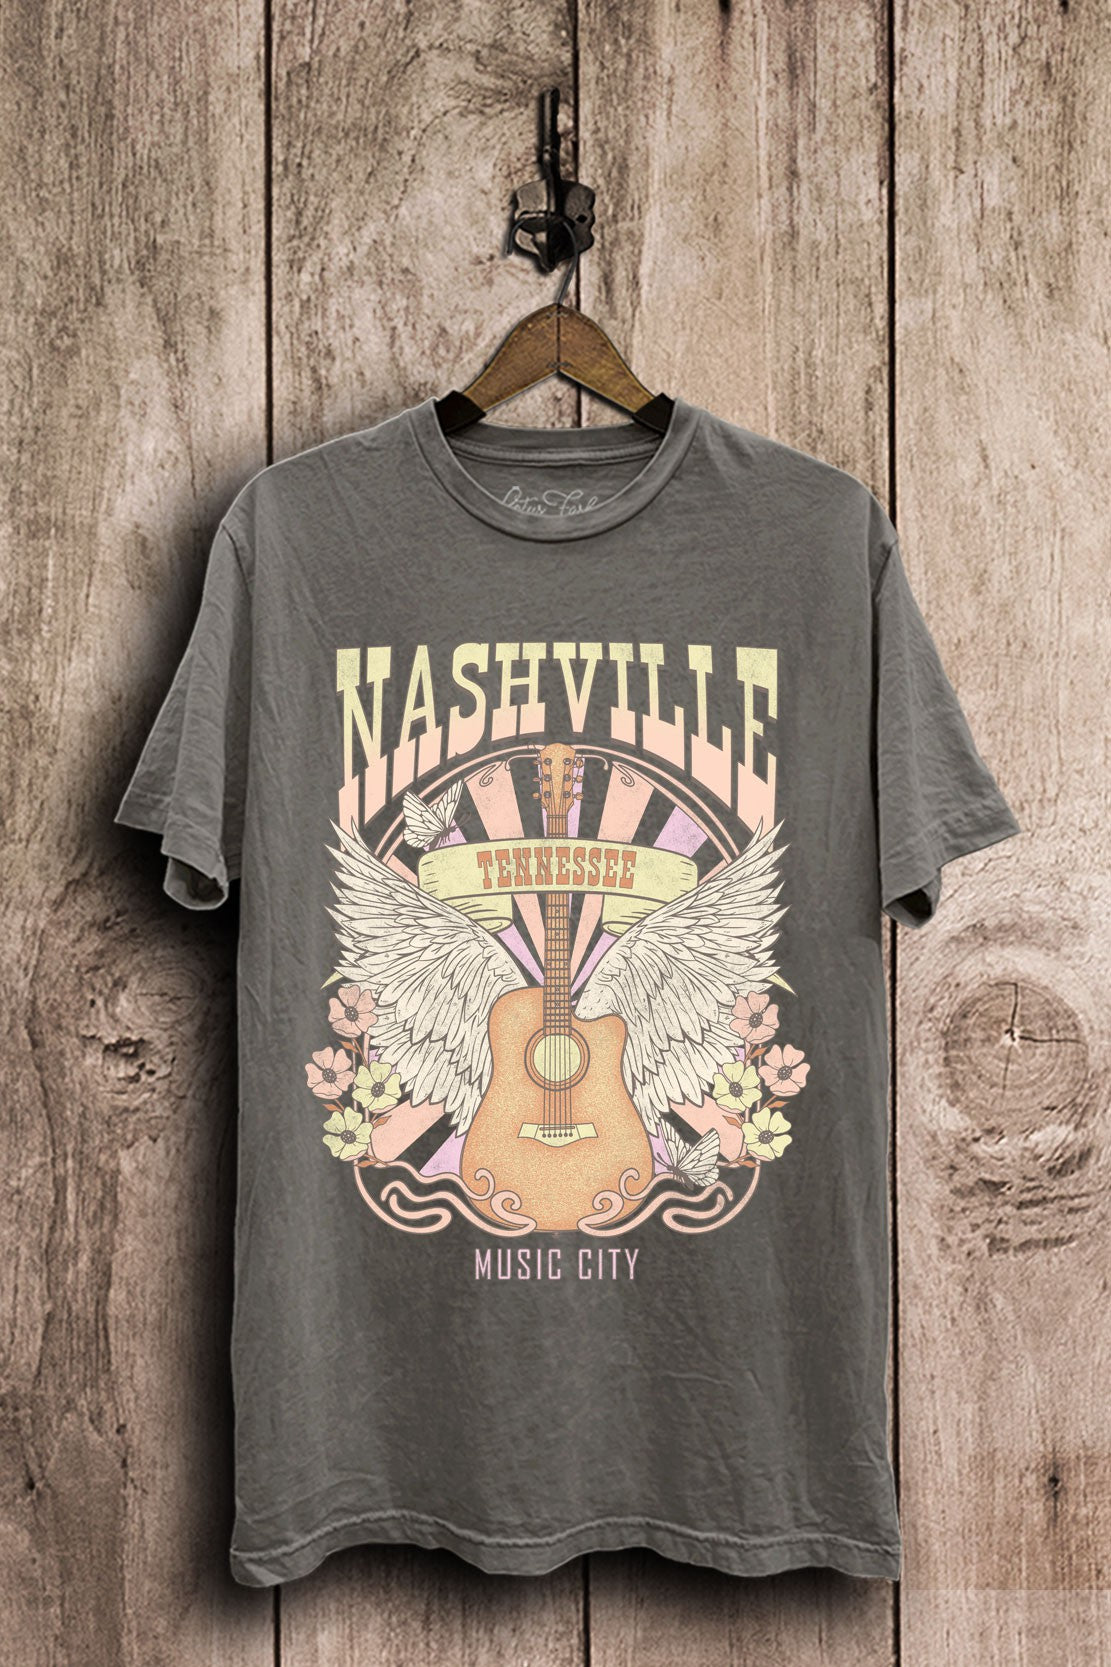 Nashville Tennessee Tee in Stone Gray Mineral Wash